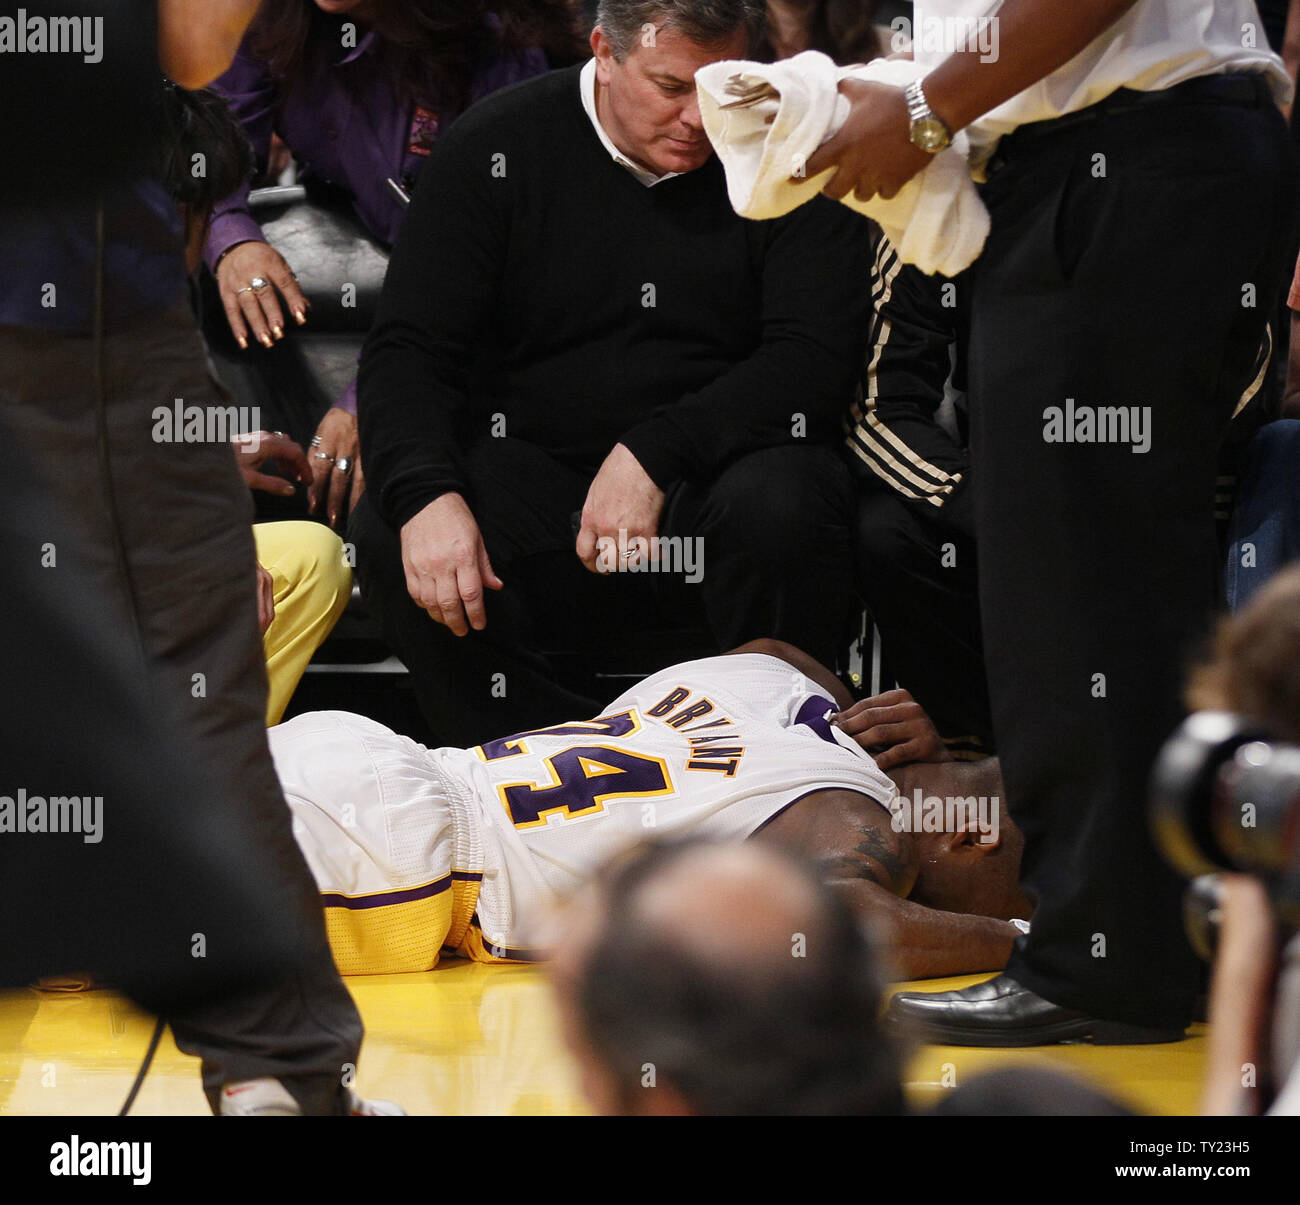 Los Angeles Lakers shooting guard Kobe Bryant (24) lays on the court after hitting his head on a chair against the New Orleans Hornets  during the first half of Game 1 of their Western Conference Playoff series at Staples Center in Los Angeles on April 17, 2011. The Hornets defeated the Lakers 109 to 100  . UPI Photo/Lori Shepler Stock Photo